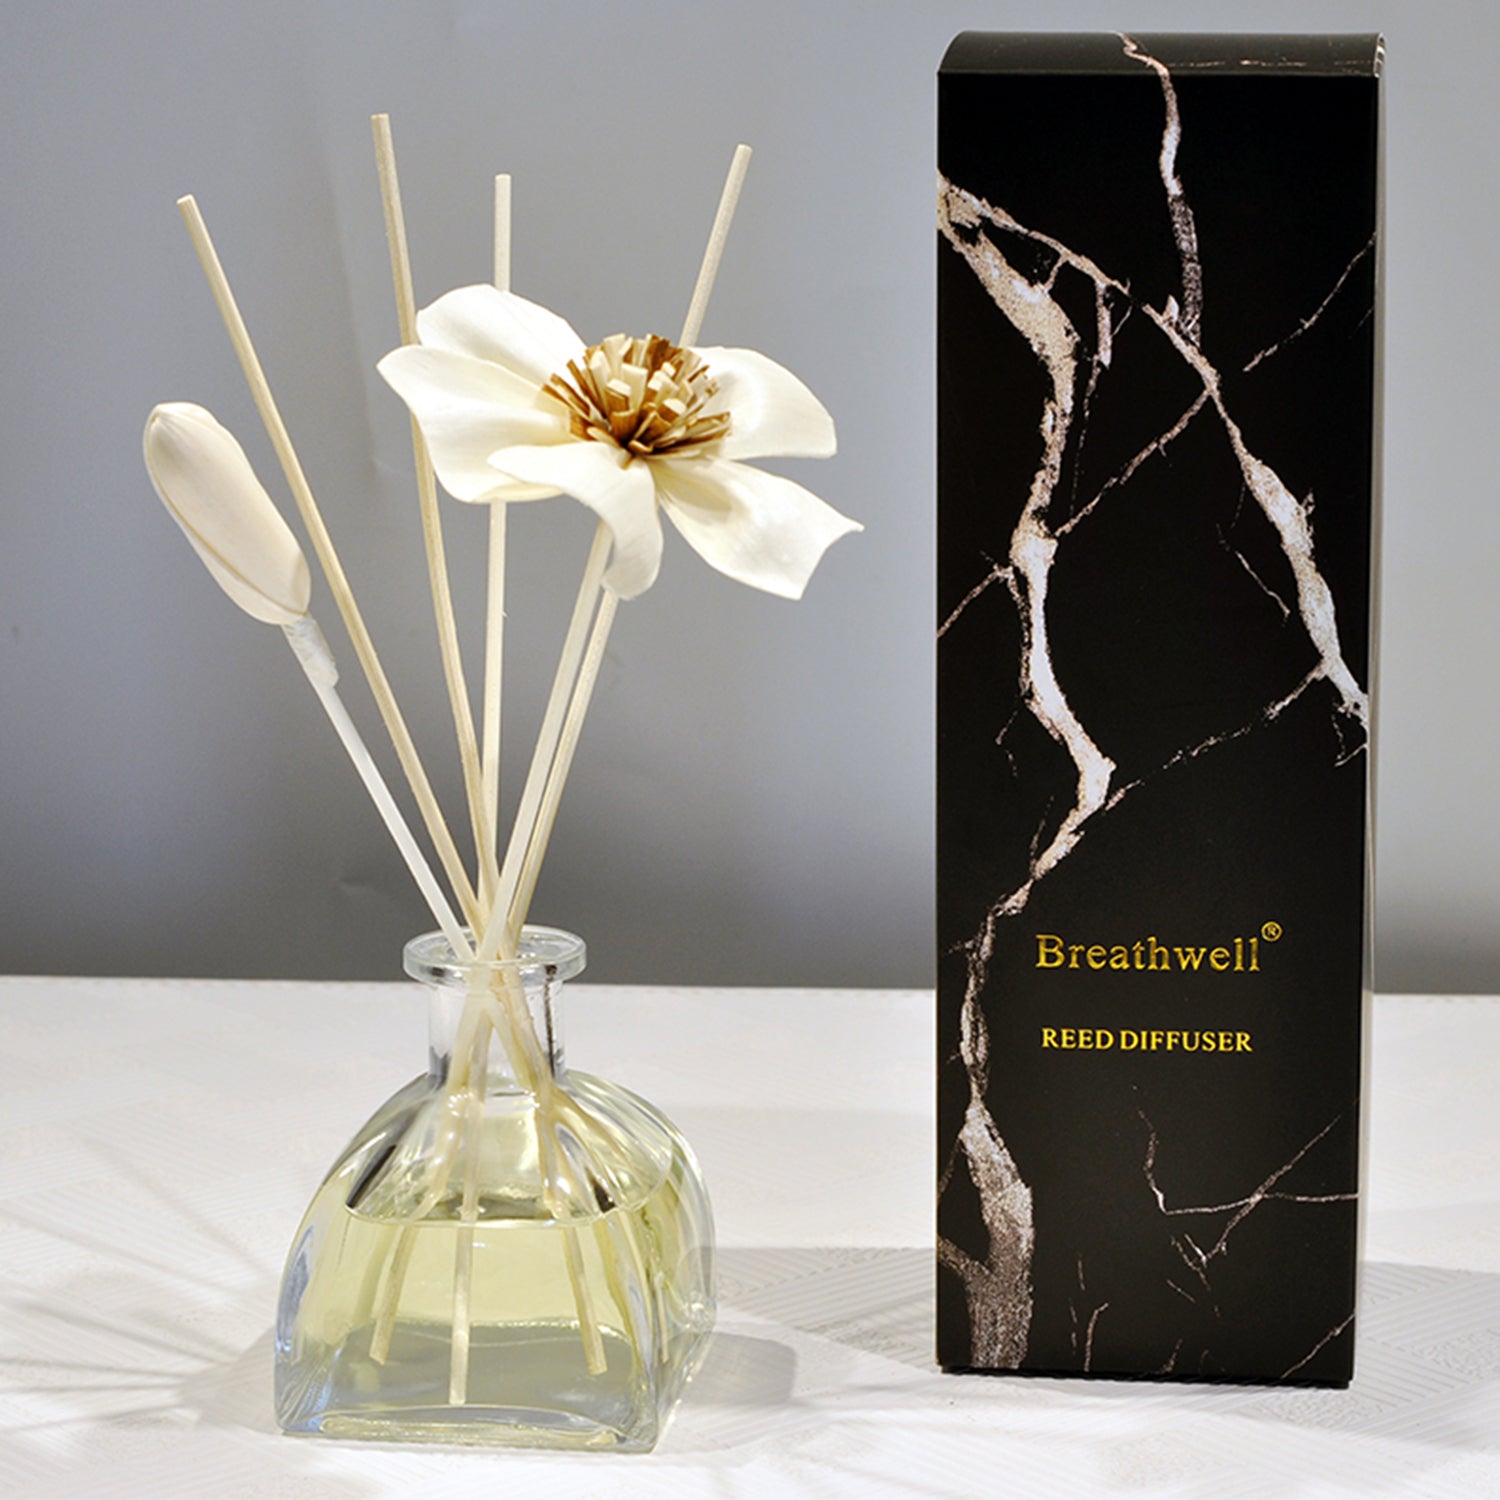 Breathwell Reed Diffuser 150ML Premium Essential Oil Aromatherapy Mongolia Yurt Bottle with Reed Stick and Sola Flower Reed Diffuser Breathwell 